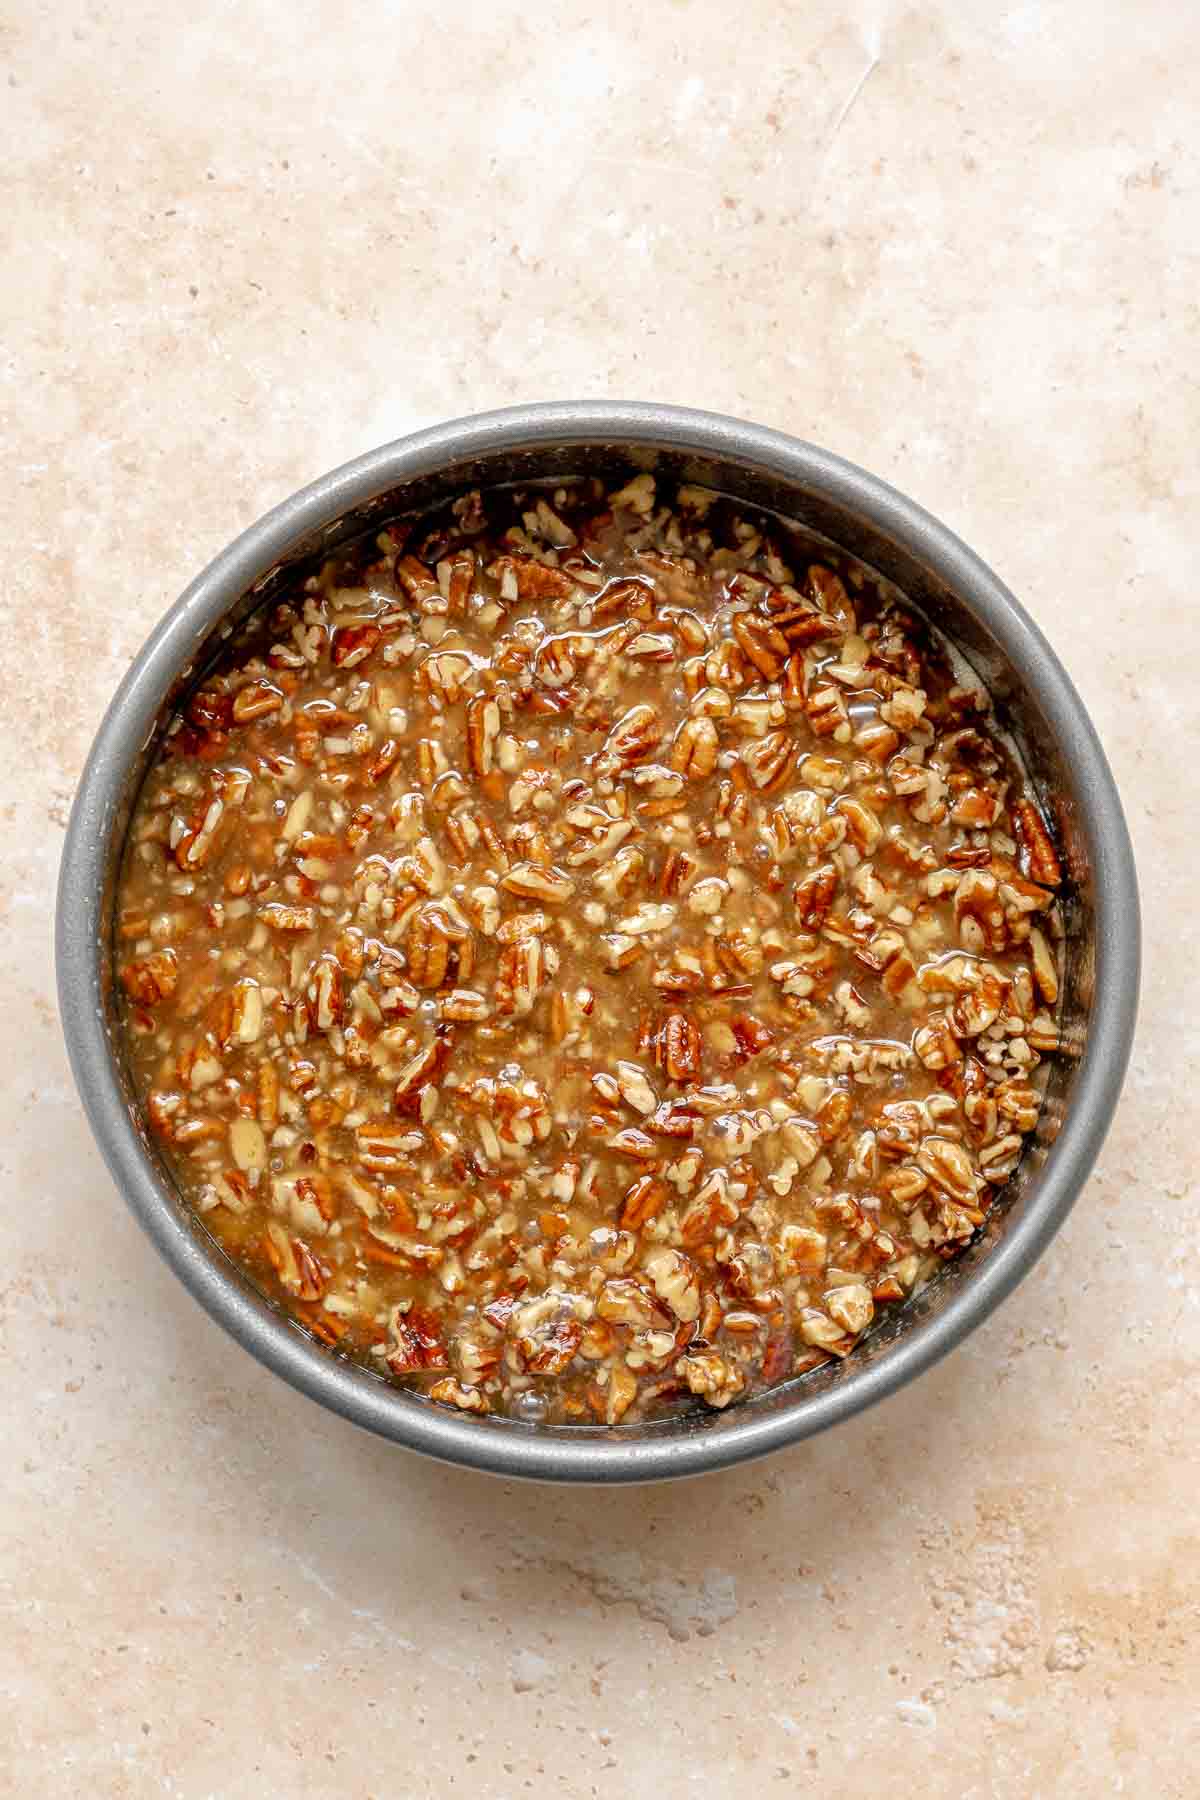 Pecans and syrup spread into the bottom of a cake pan.